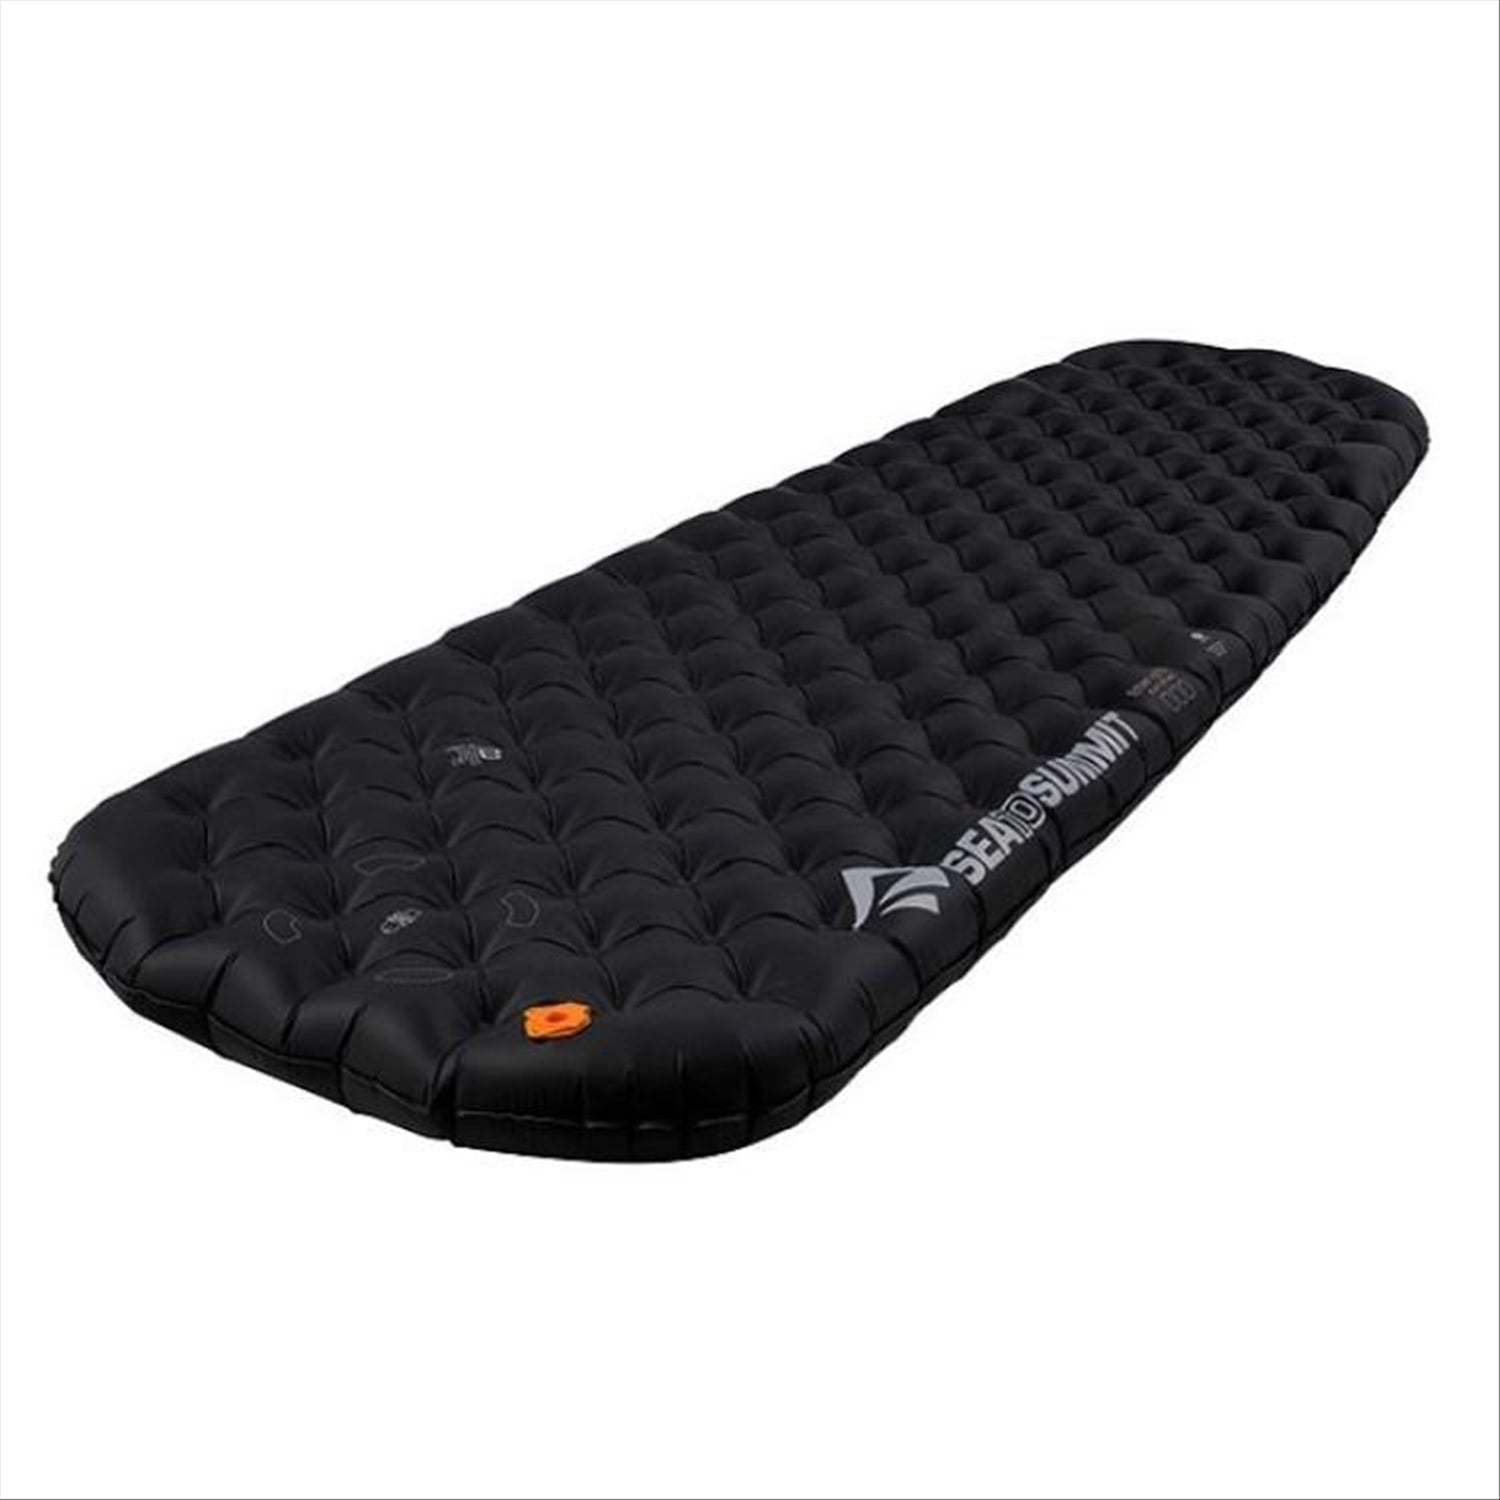 Sea To Summit Ether Light XT Etreme Insulated Sleeping Mat, R-Value 6.